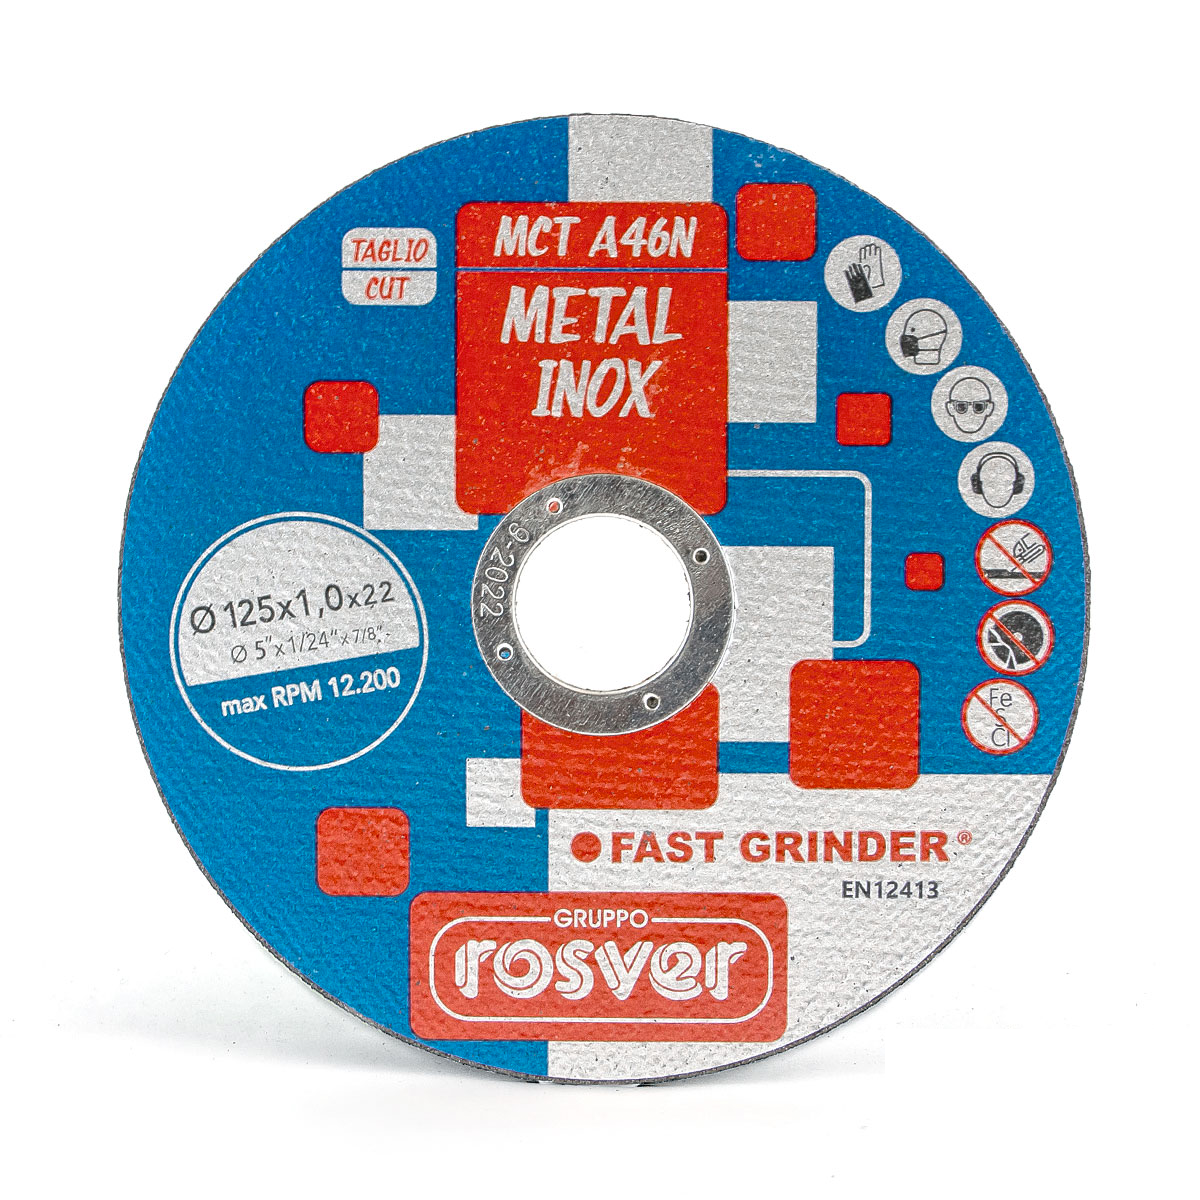 Thin Flat Cutting Discs MCT 115 A46N Stainless - Rosver - Conf.100pz